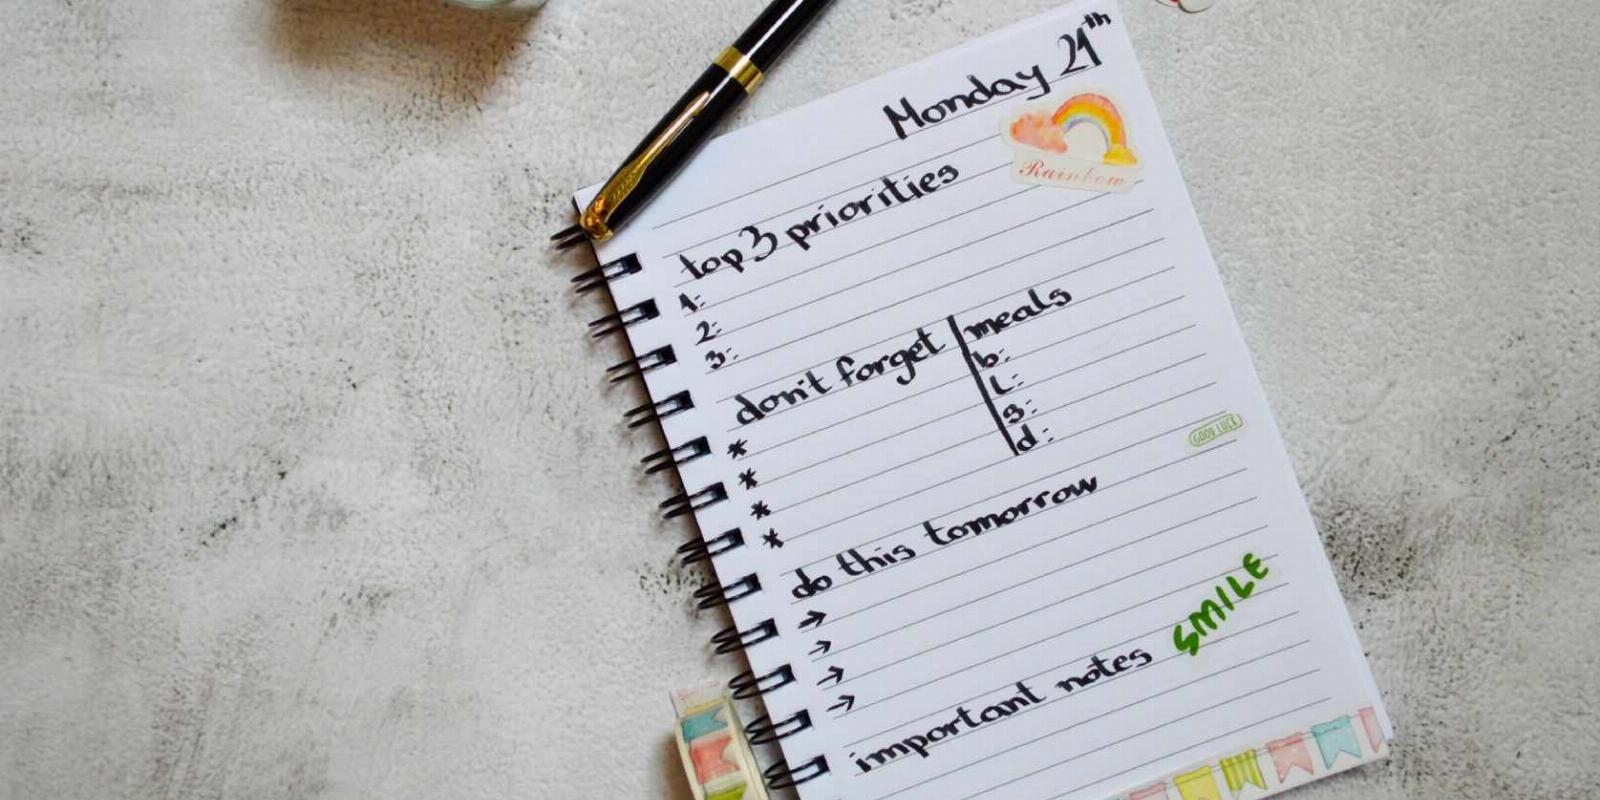 5 Wonderful Free Day Planner Apps for Your To-Dos, Goals, and Daily Habits